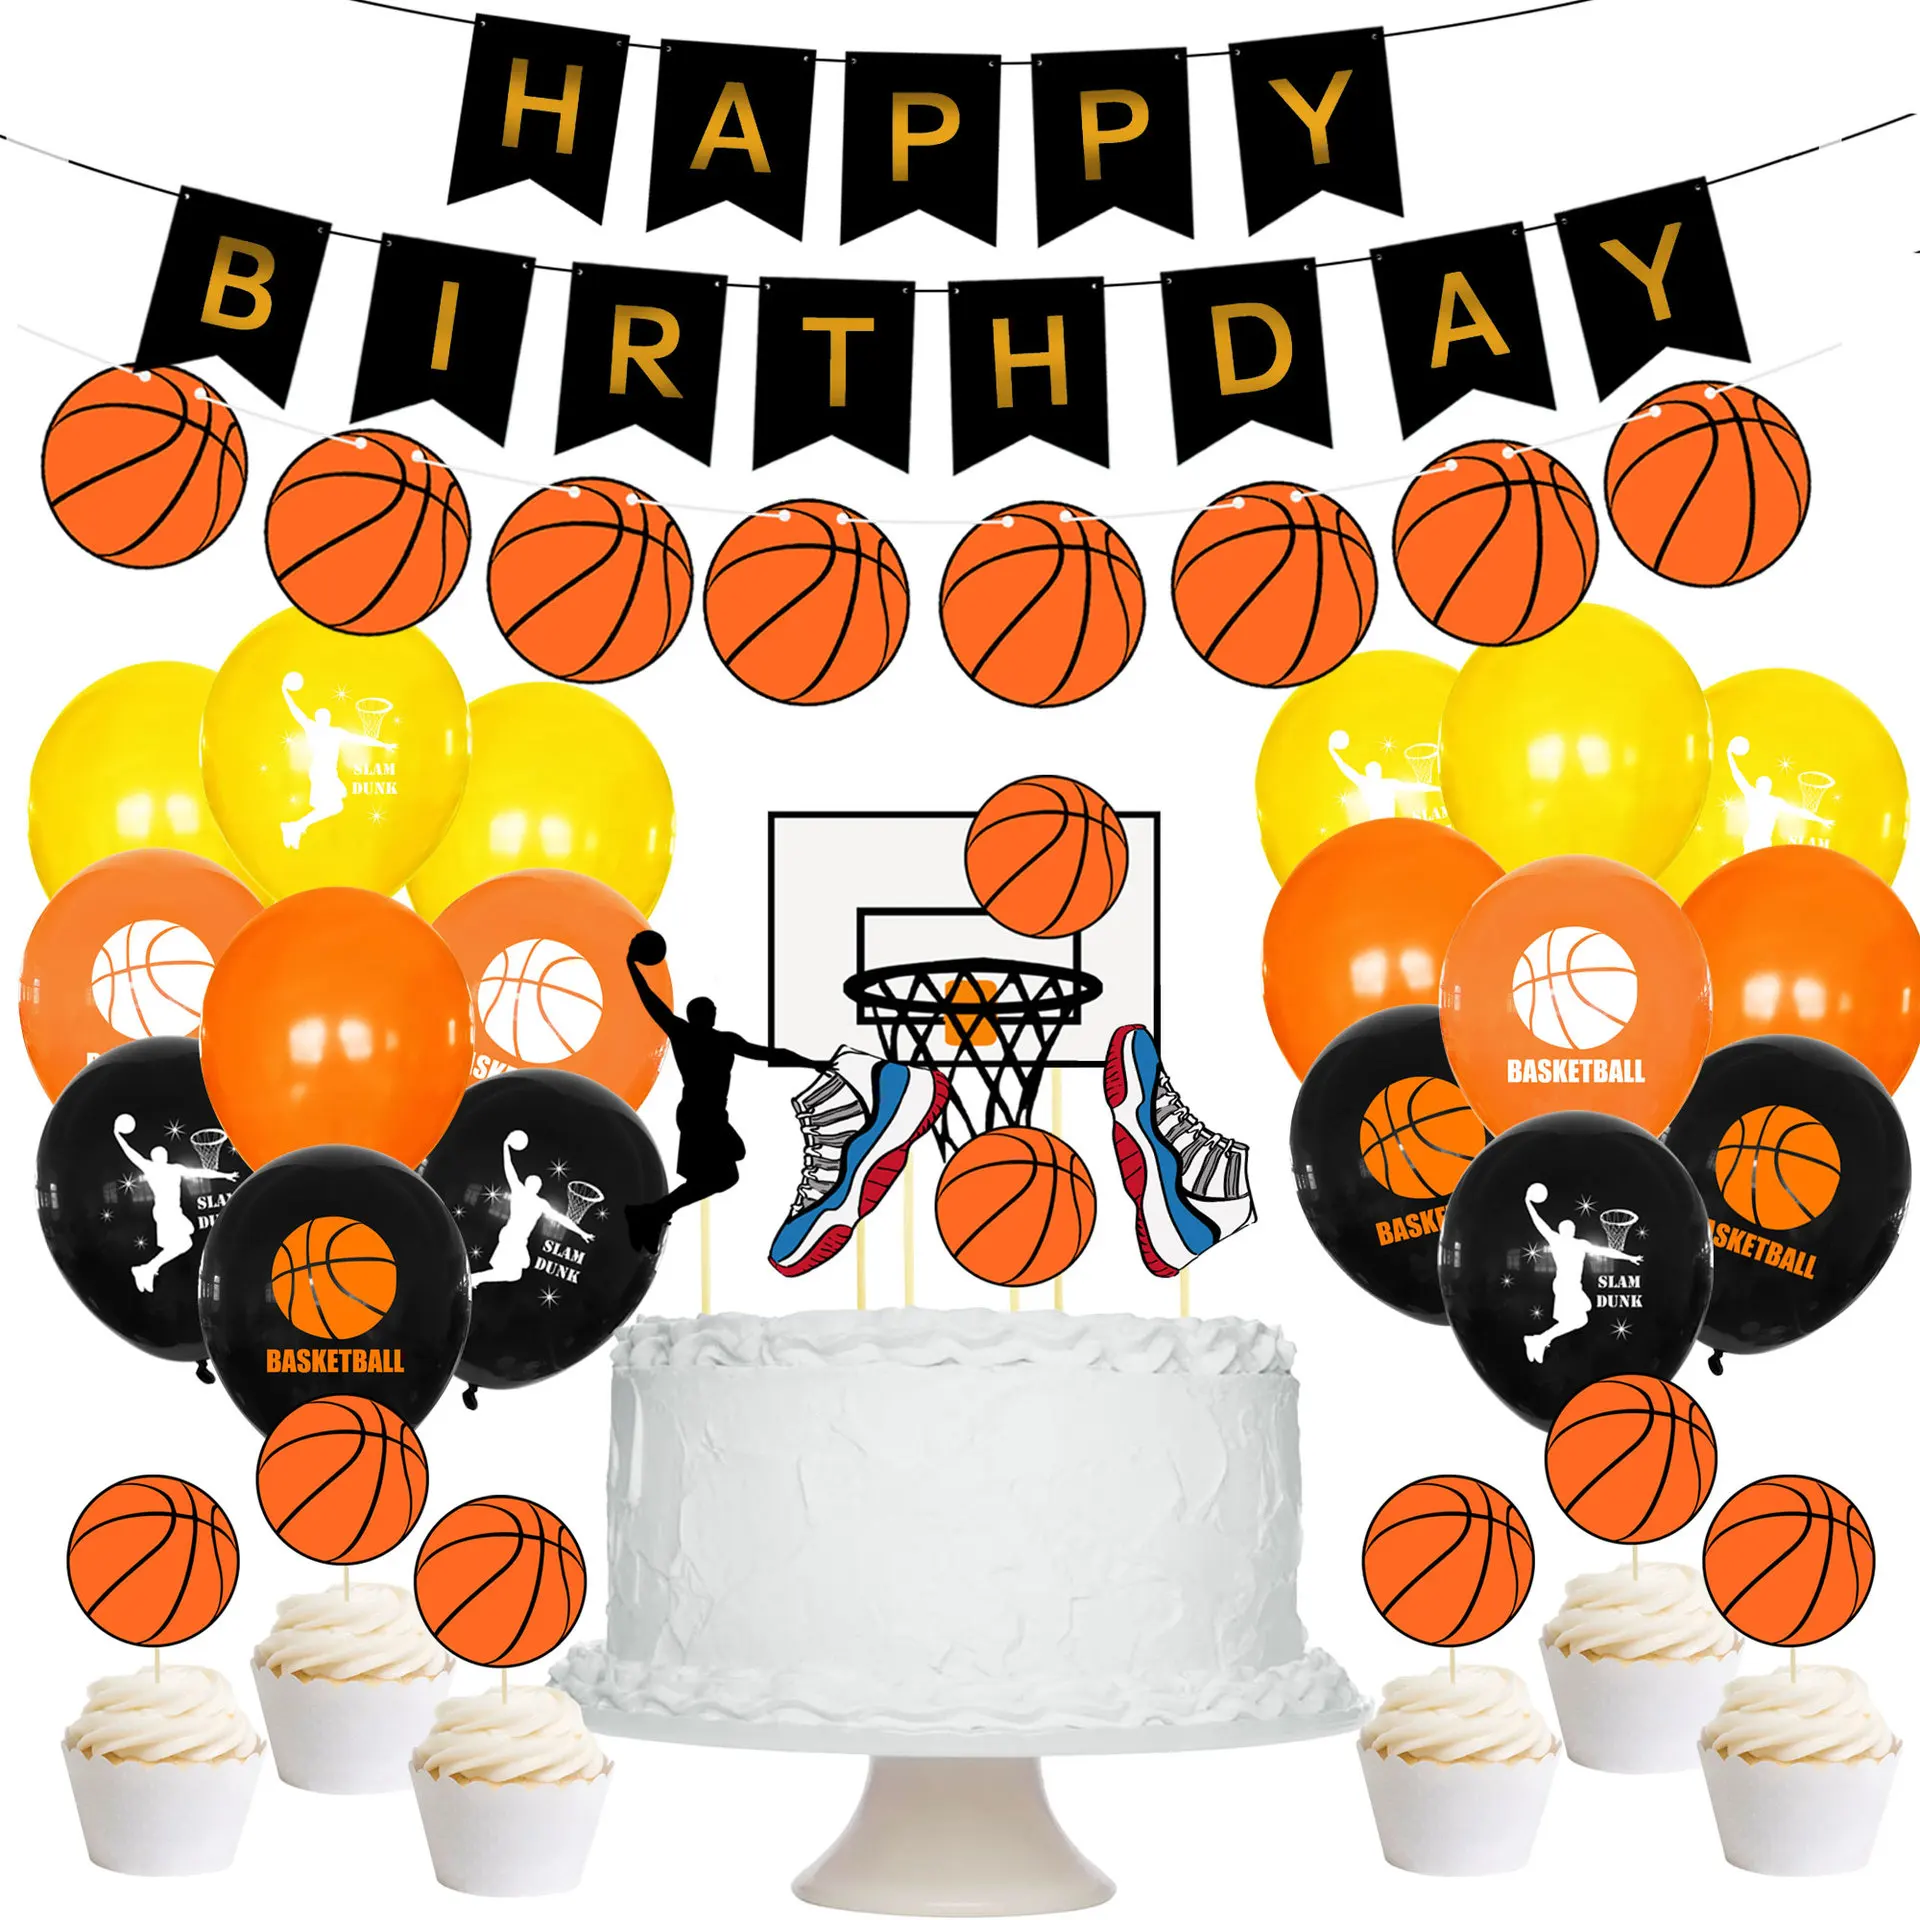 

Sursurprise Basketball Theme Party Decoration Balloon Set with Basketball Garland Banner Cake Topper for Boy Birthday Supplies